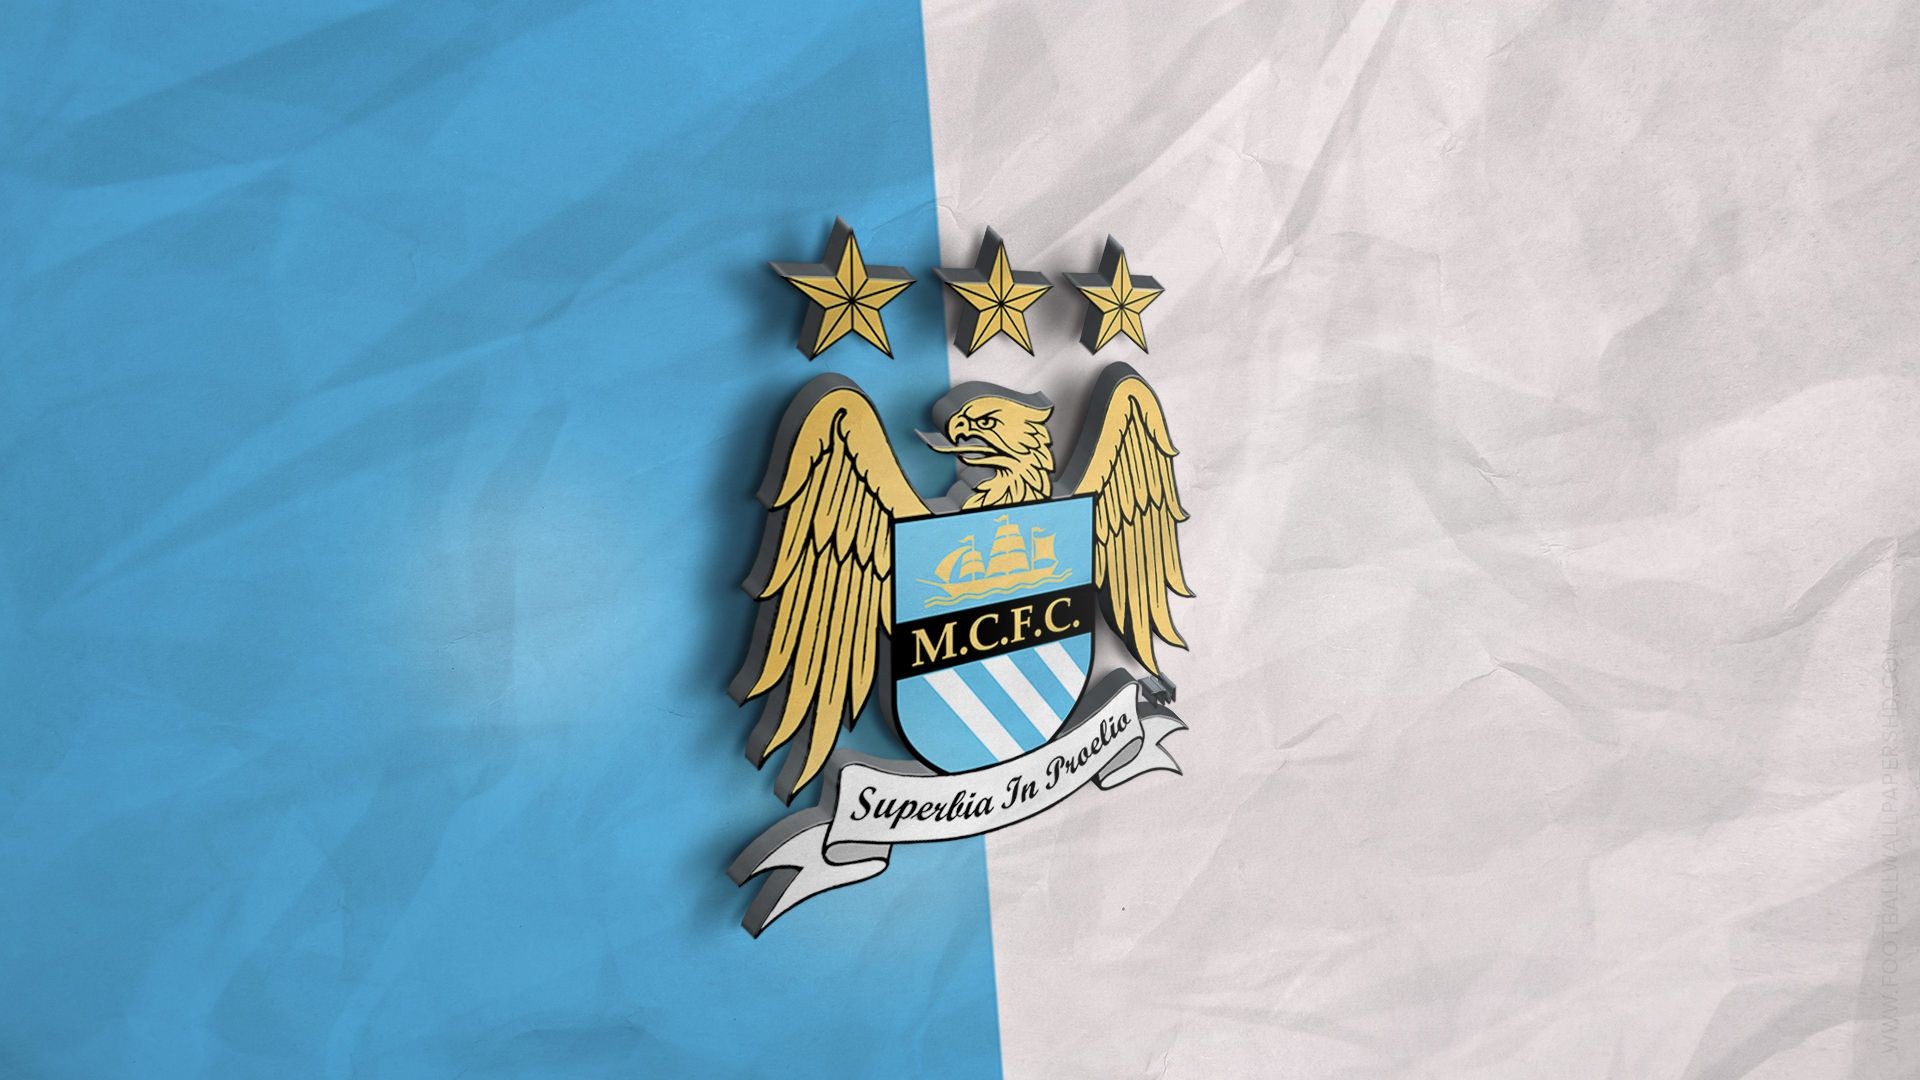 Manchester City For Mac Wallpaper with high-resolution 1920x1080 pixel. You can use this wallpaper for your Desktop Computers, Mac Screensavers, Windows Backgrounds, iPhone Wallpapers, Tablet or Android Lock screen and another Mobile device